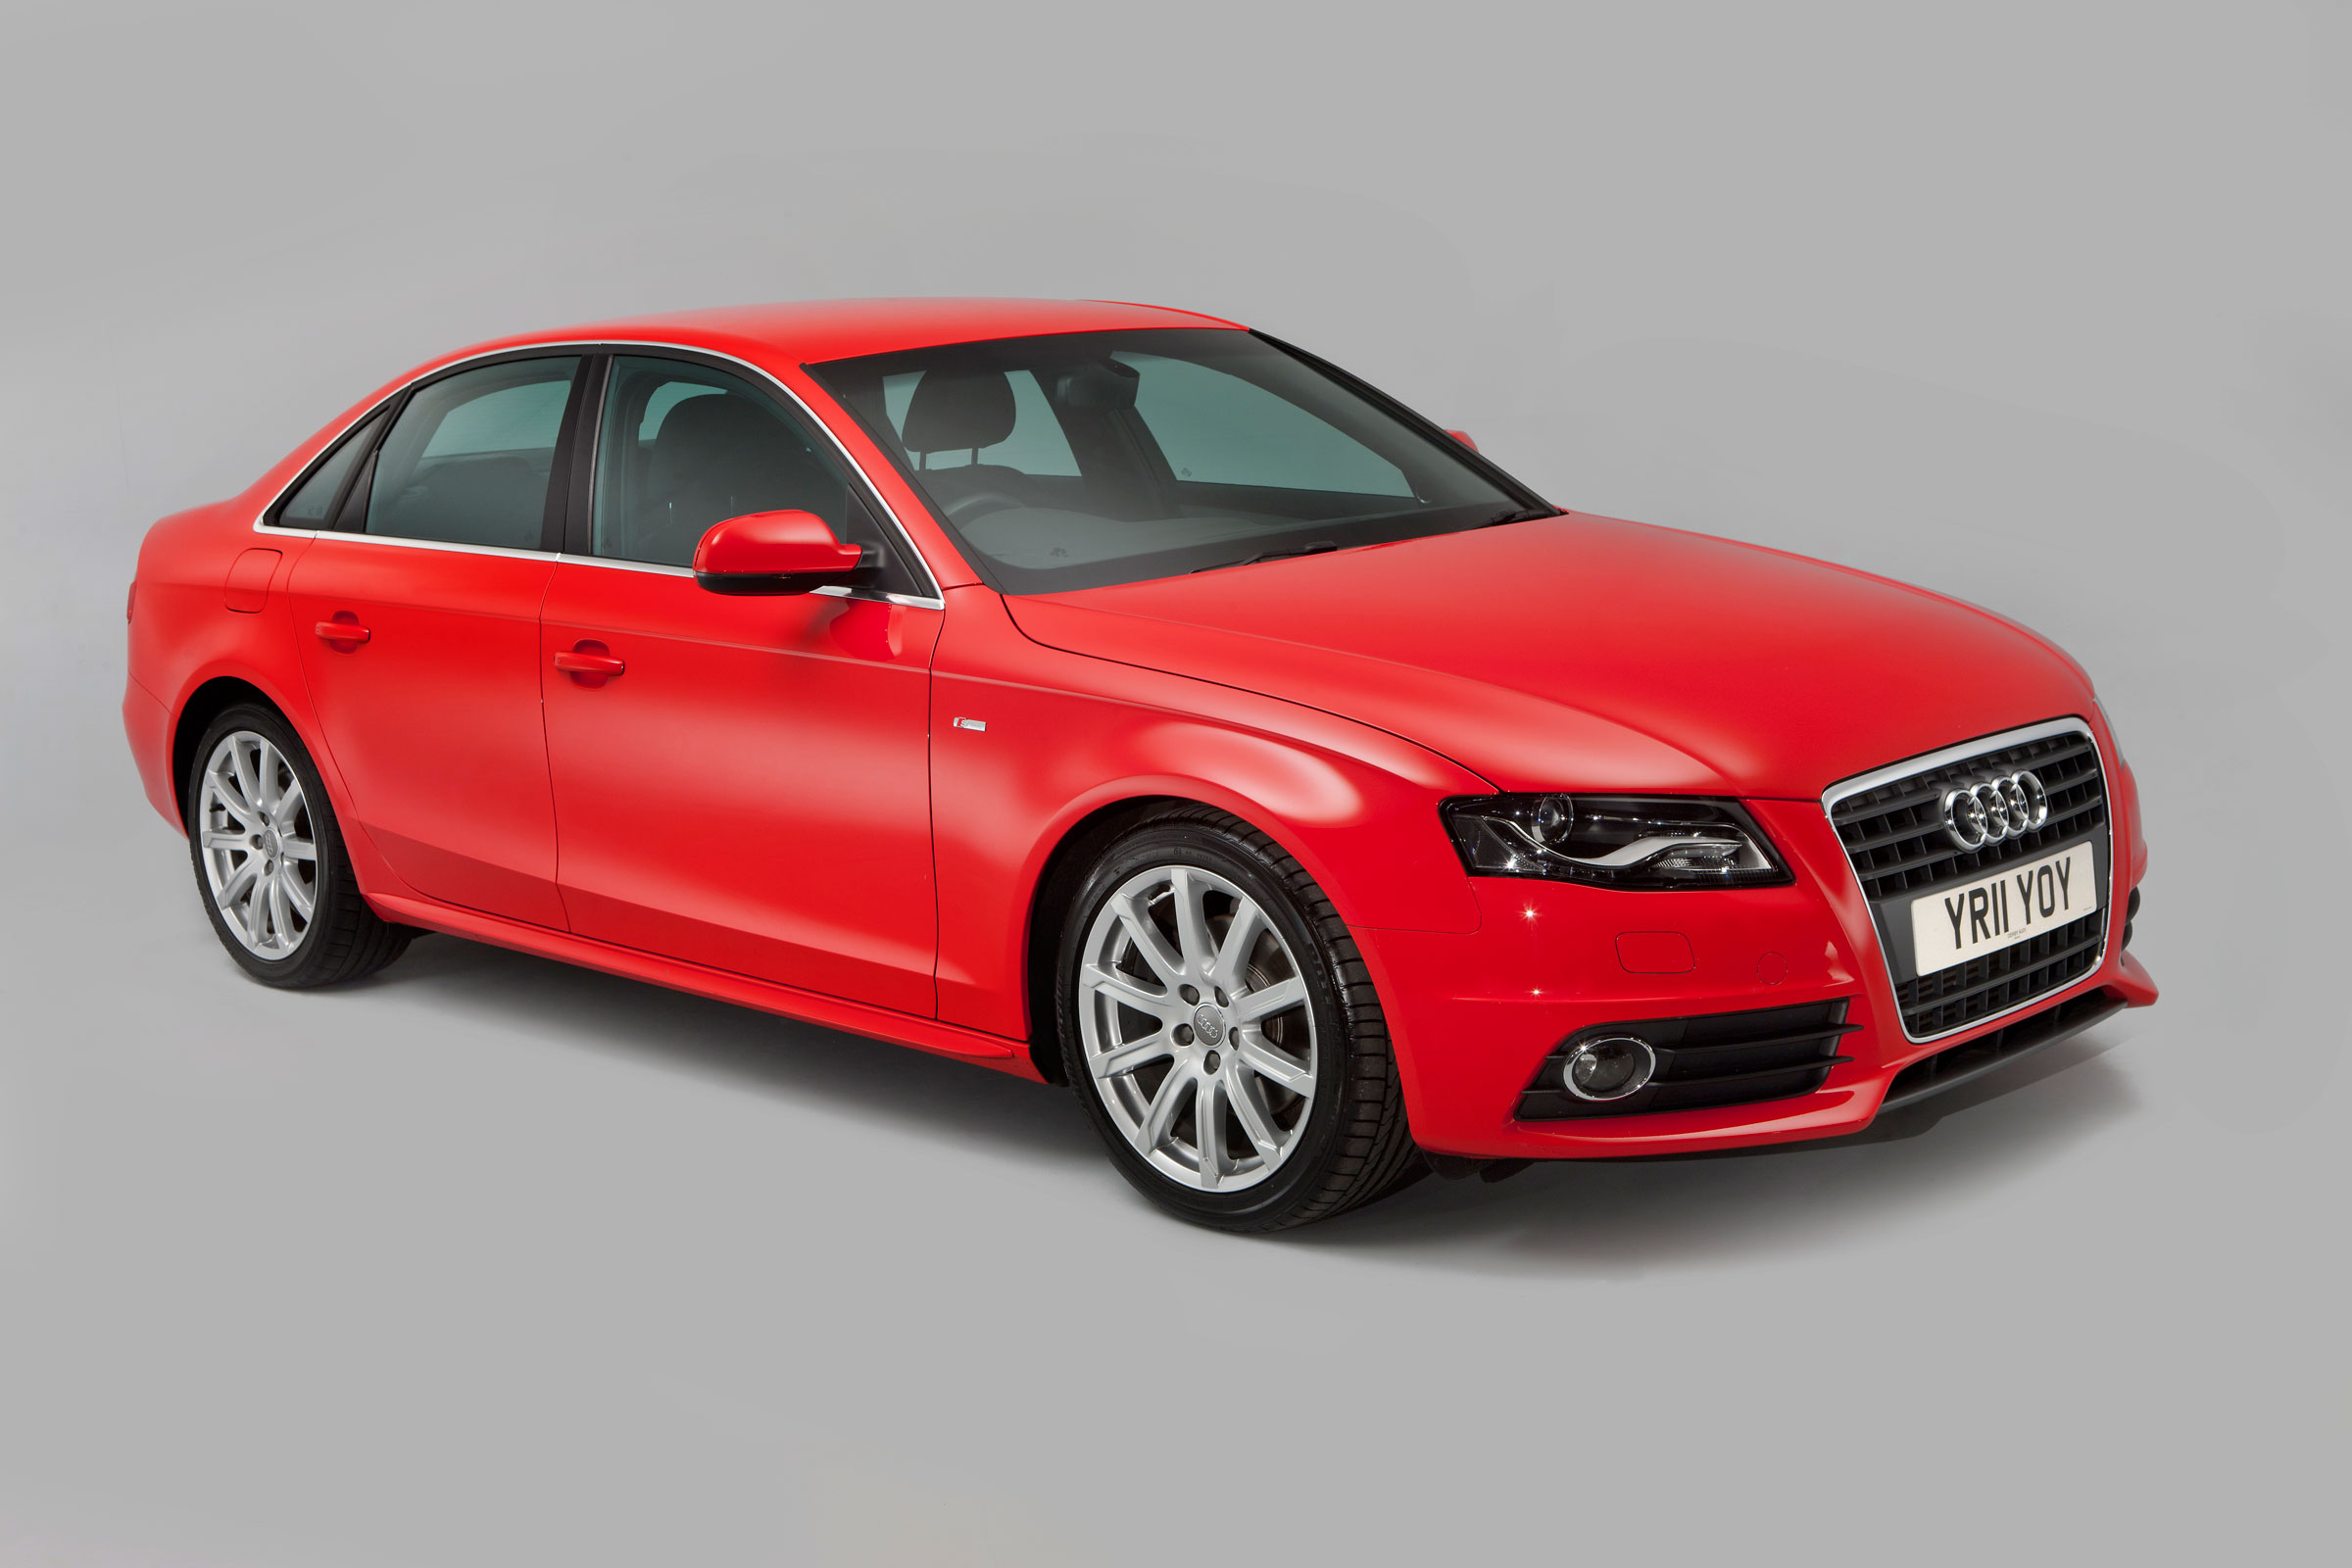 Used Audi A4 buying guide 2008-2015 (Mk4)